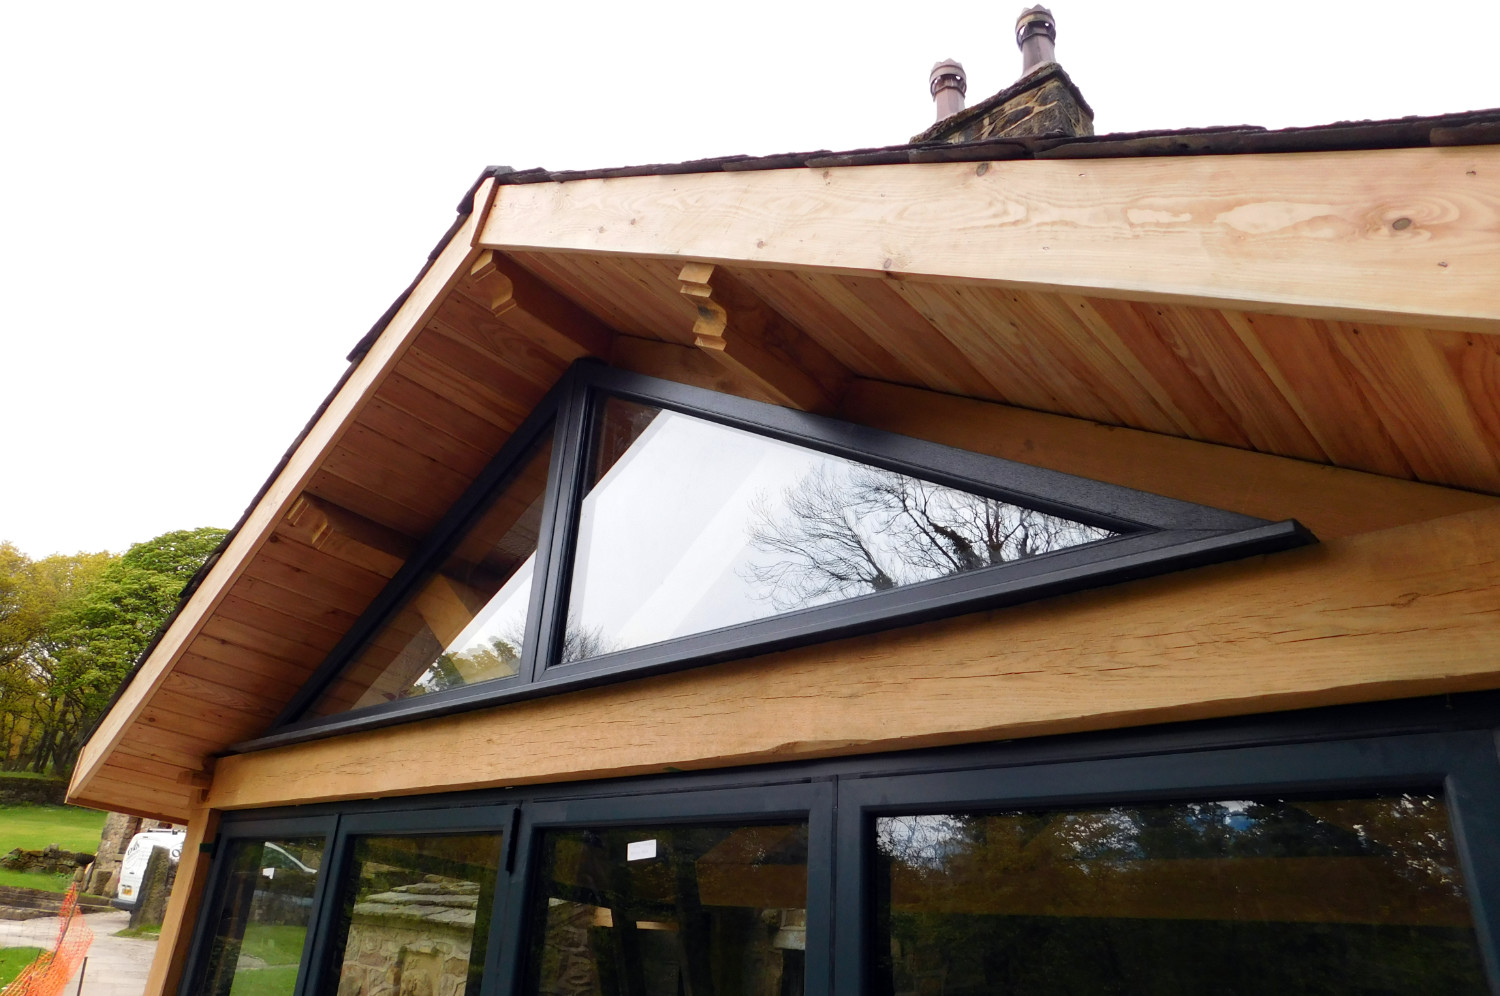 Extension with traditional Oak Frame, stone walls and slate roof